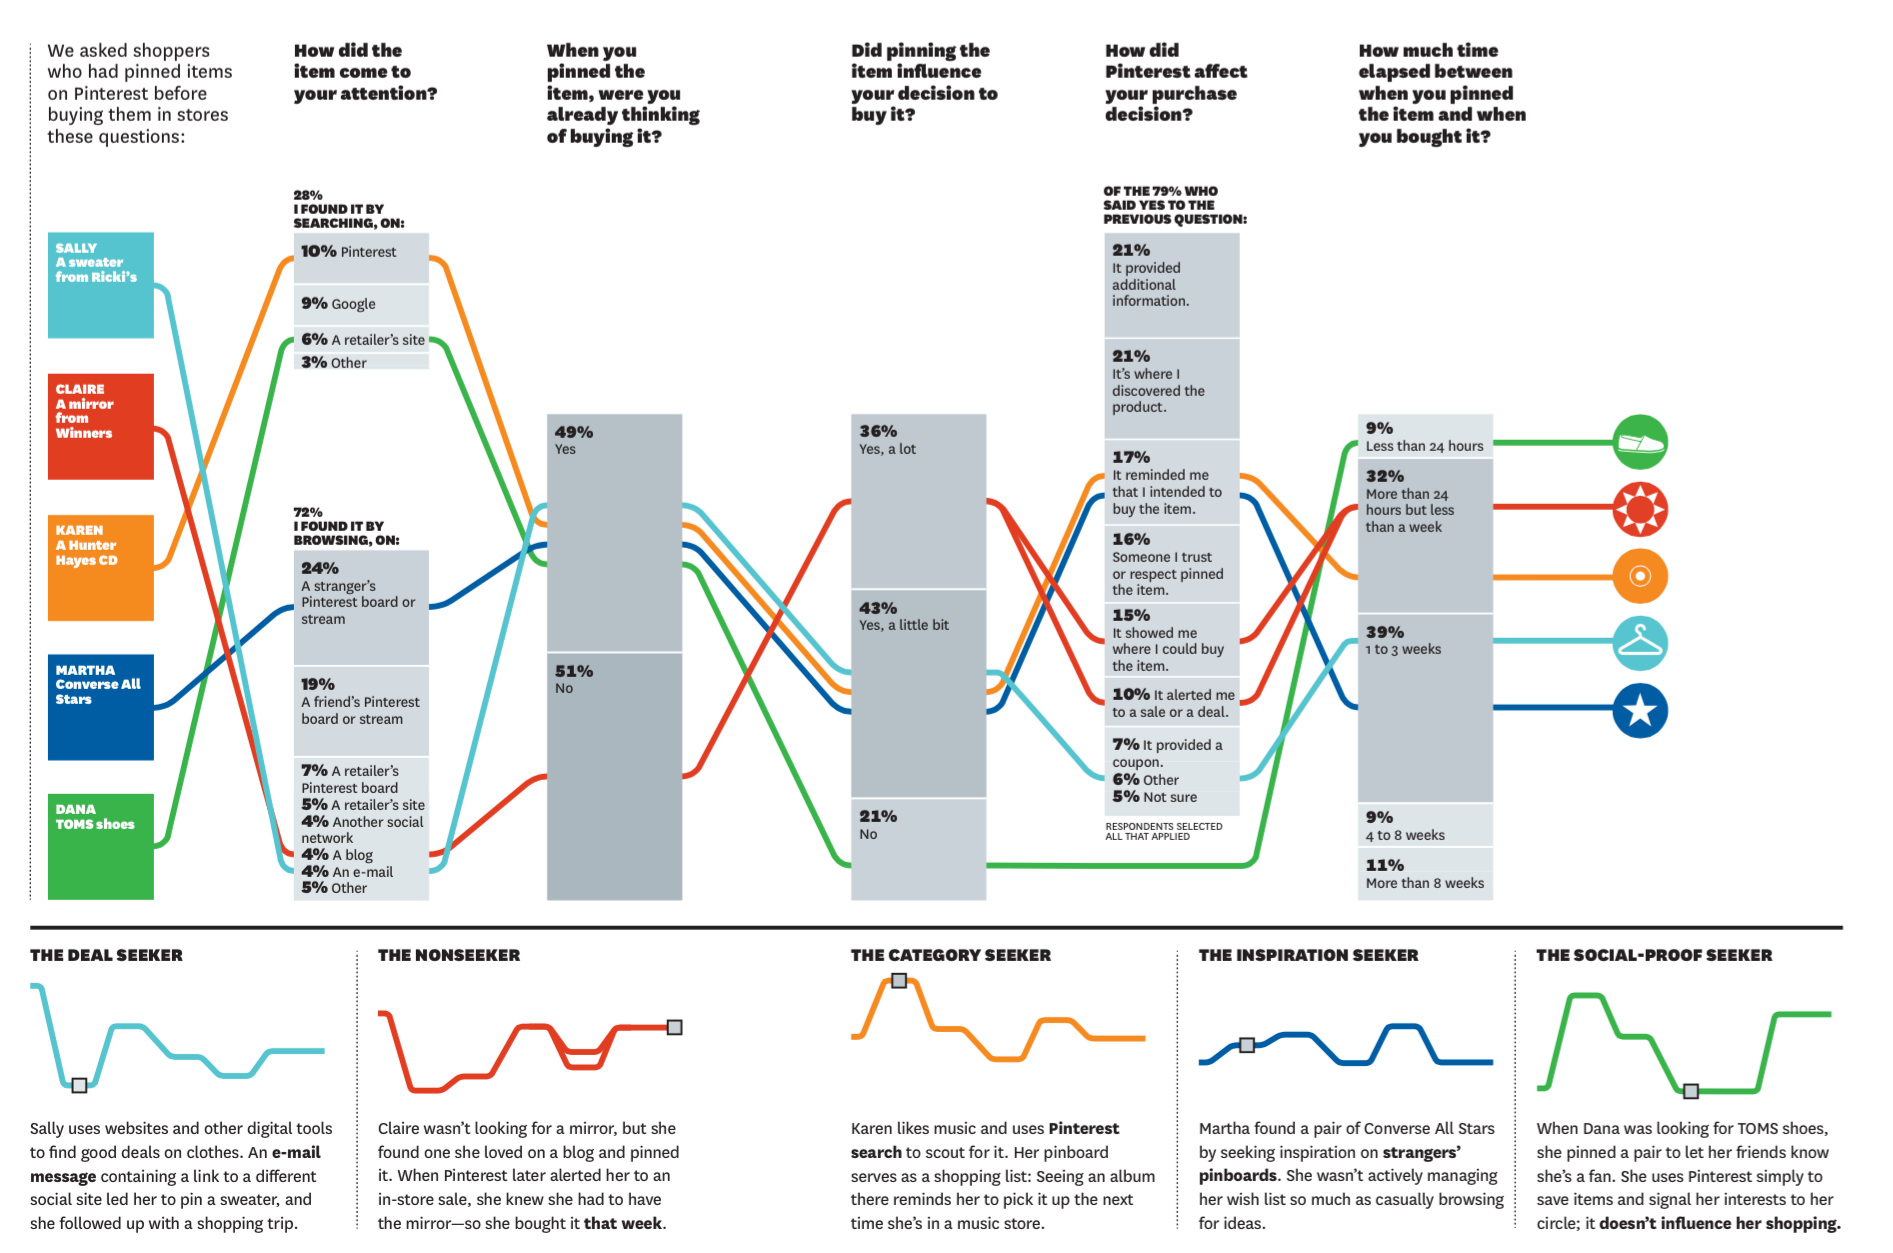 HBR graphic feature on pinterest driving sales